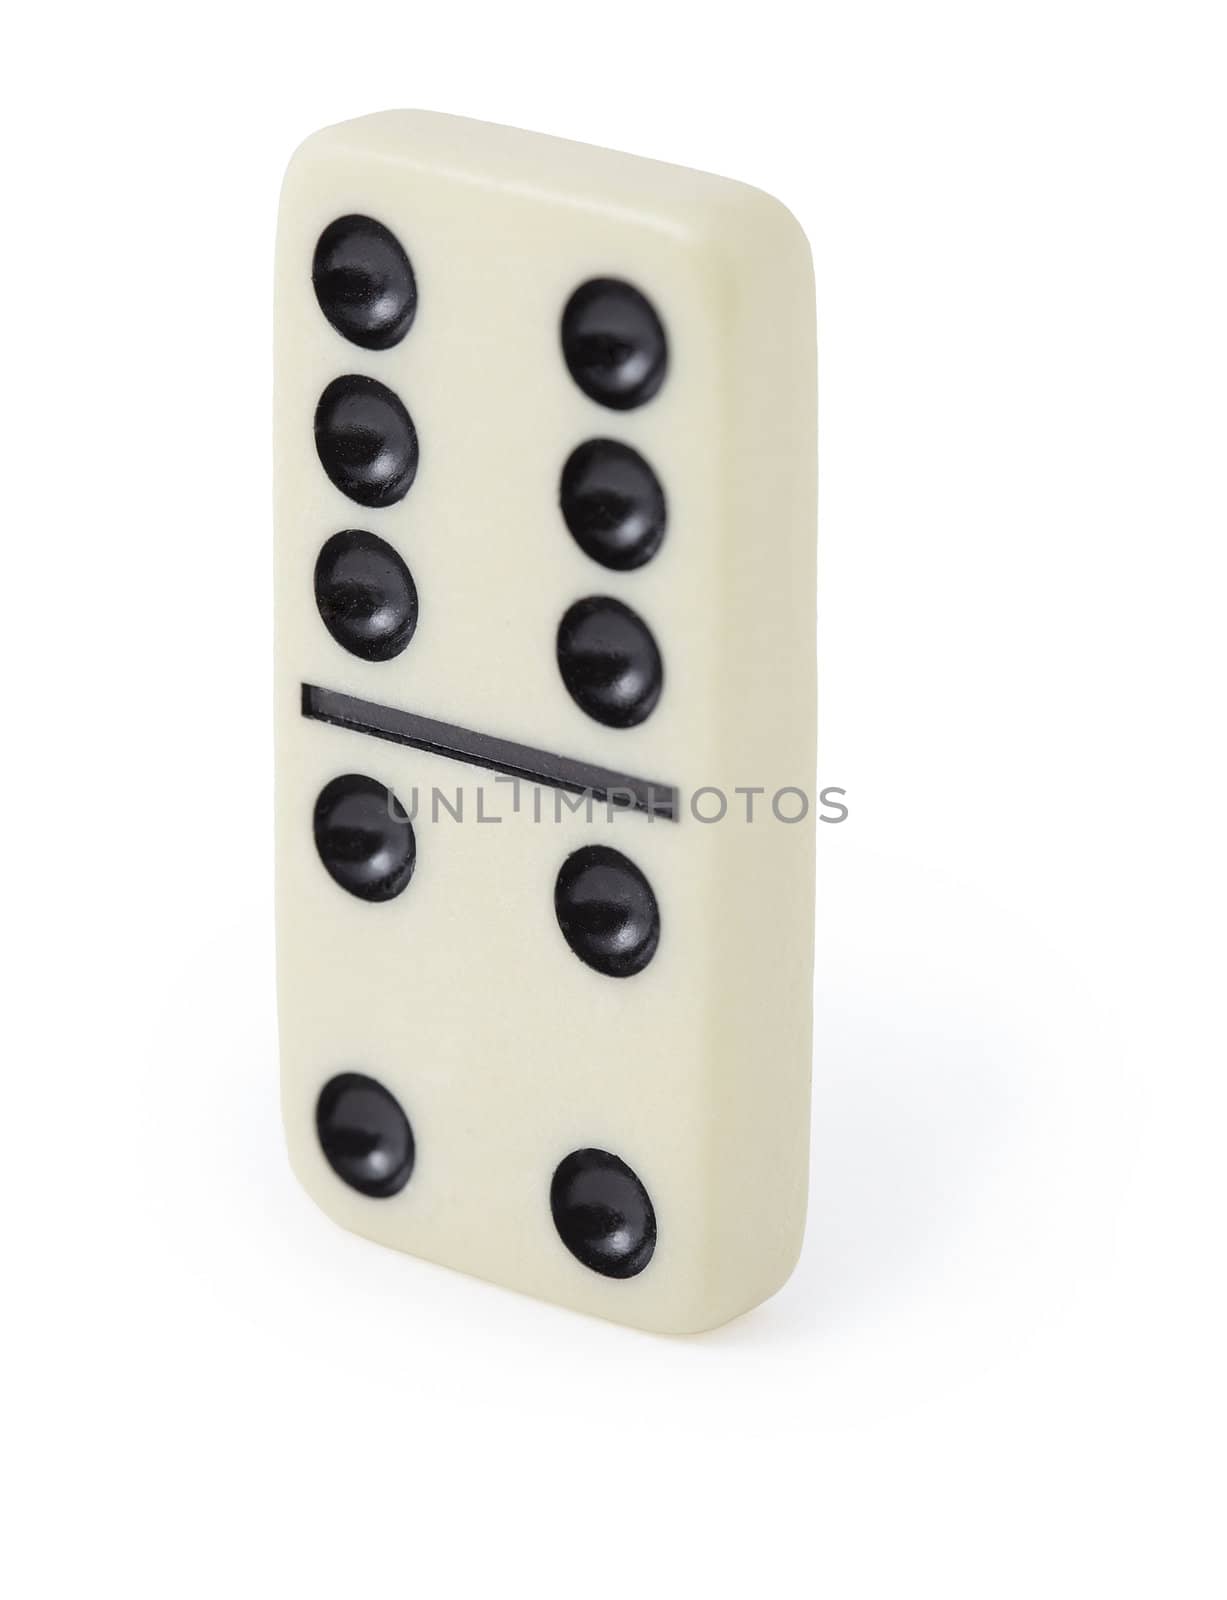 One dominoes standing on white background close up